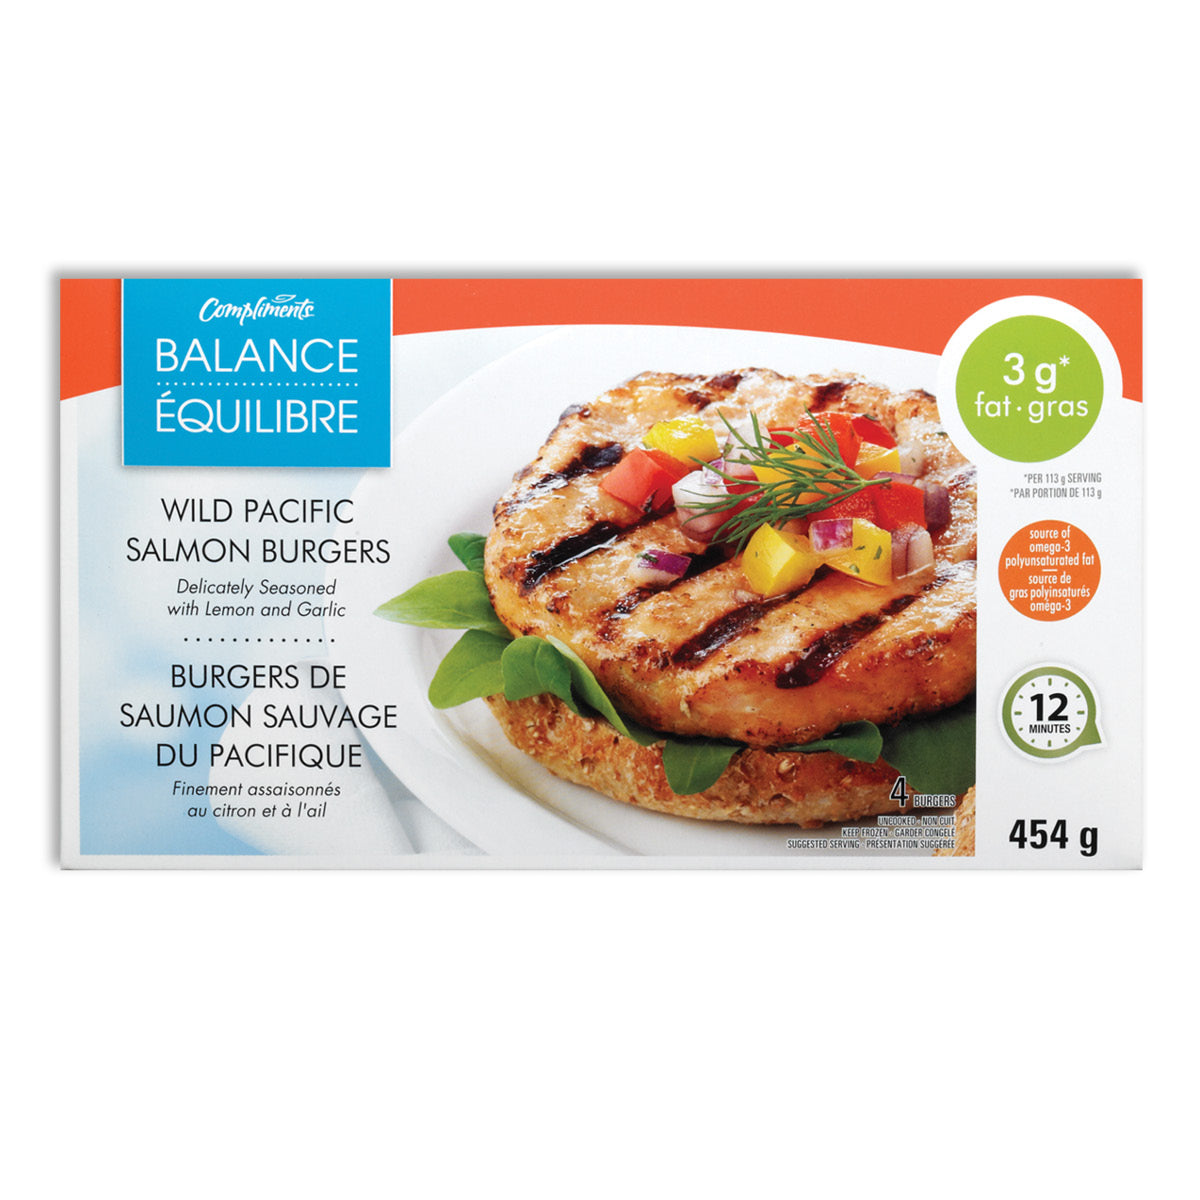 Compliments Wild Pacific Salmon Burgers, 454g